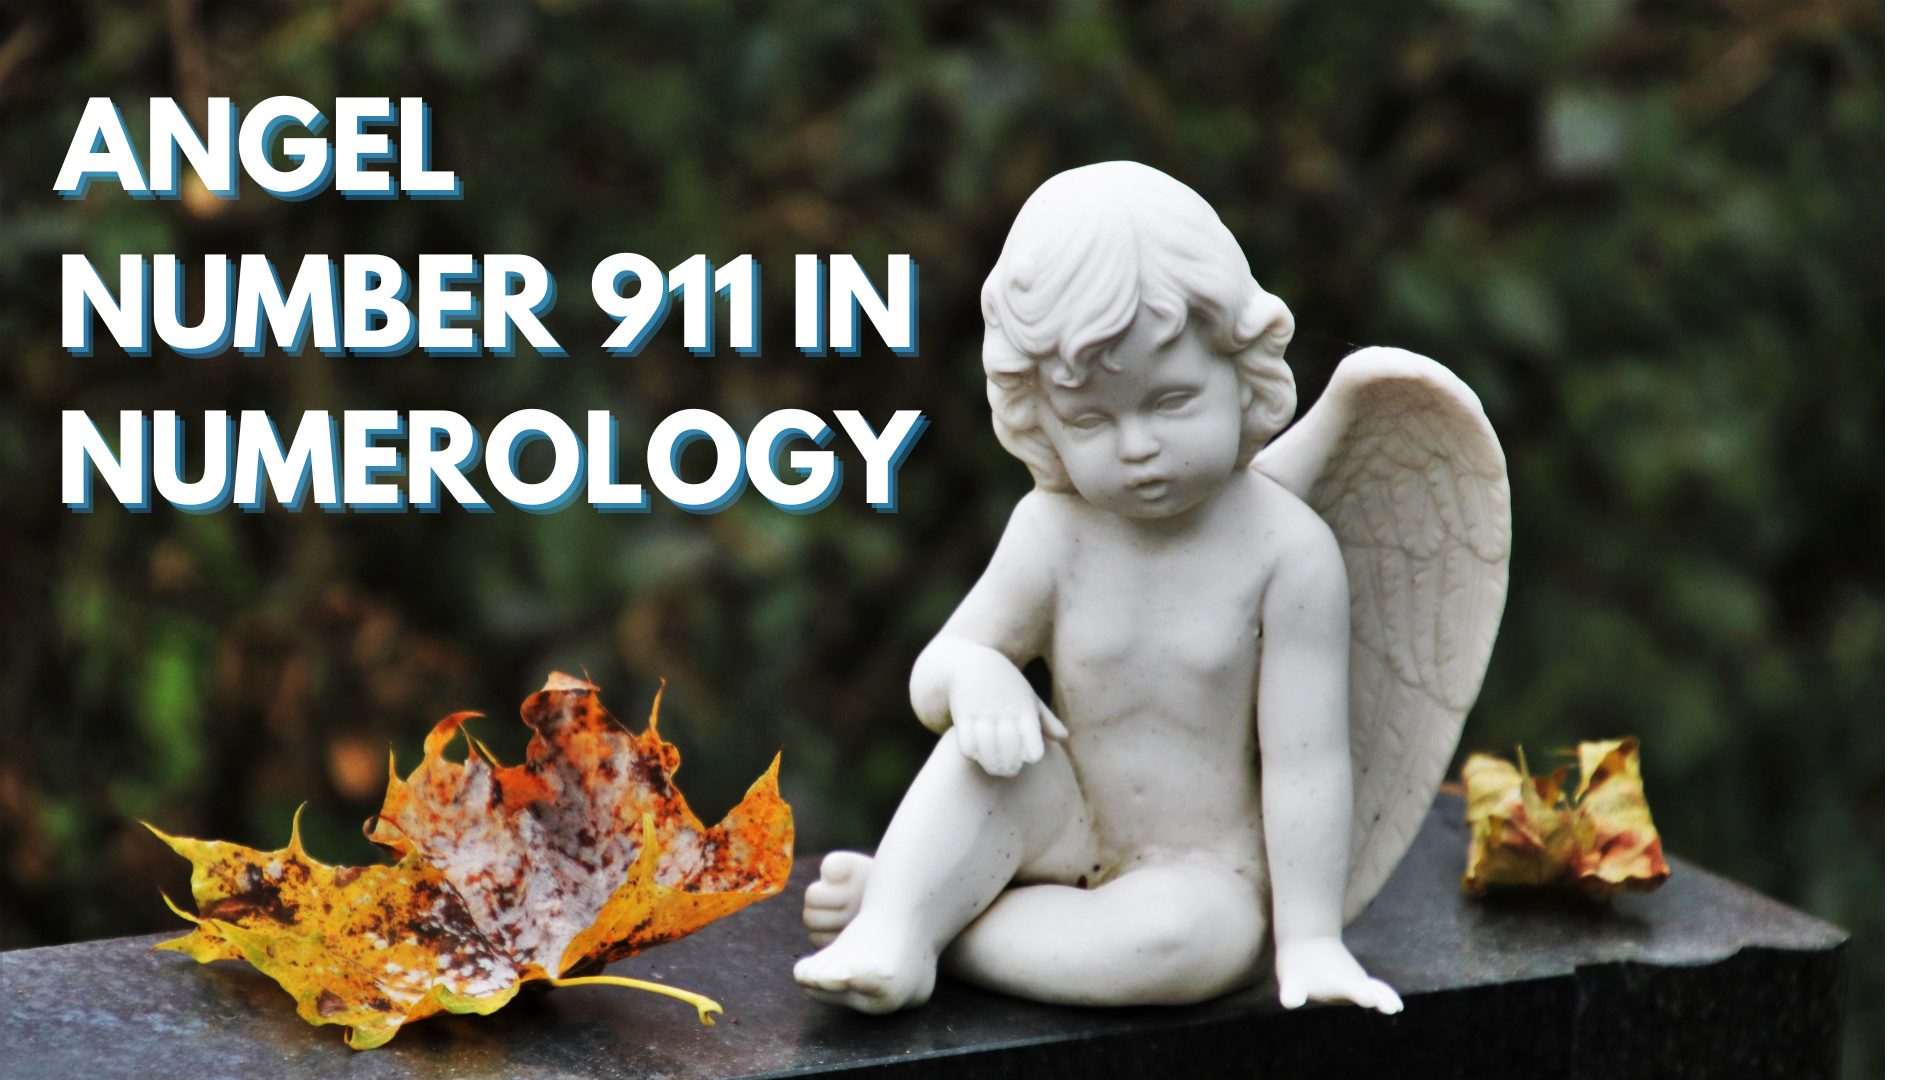 An angel statue sitting on a stone with a leaf beside it and words Angel Number 911 In Numerology